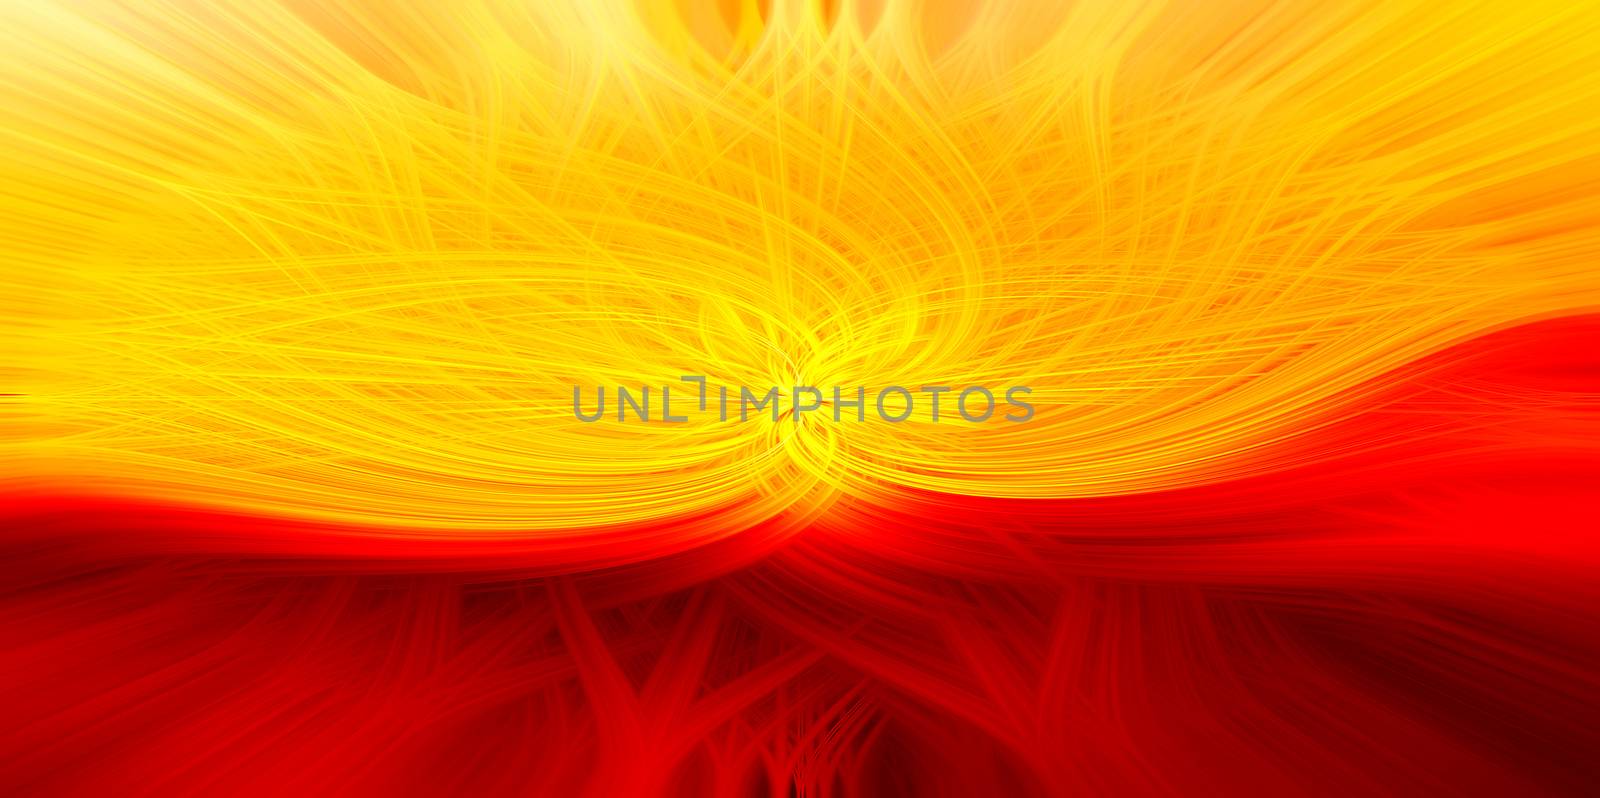 Beautiful abstract intertwined symmetrical 3d fibers forming a shape of sparkle, flame, flower, interlinked hearts. Maroon, red, yellow, and orange colors. Illustration. Banner and panorama size